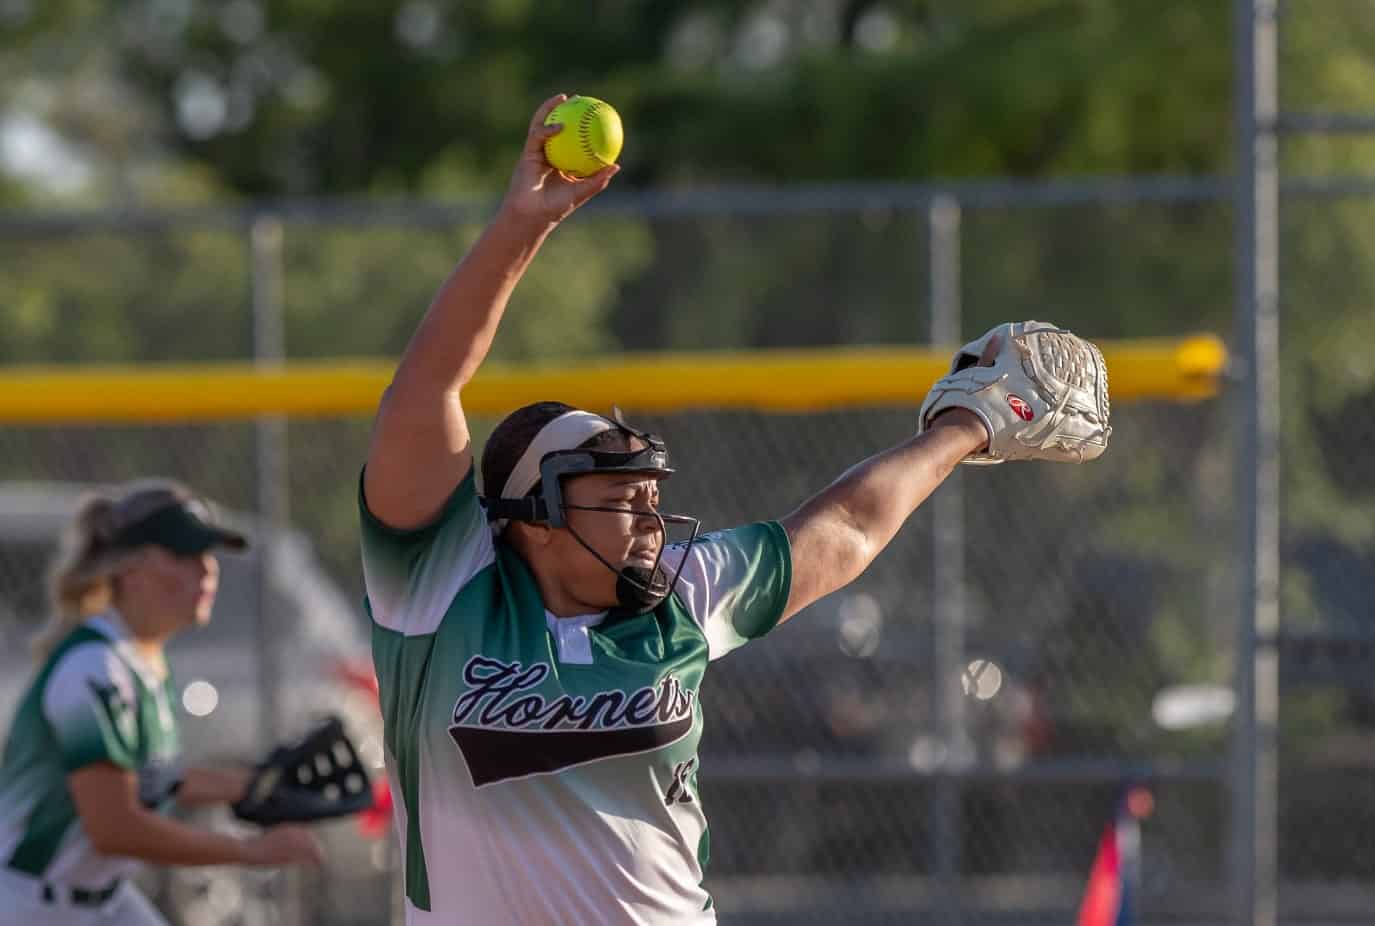 Weeki Wachee High’s ,16, Jade Thompson pitched 6 2/3 innings in relief, giving up just one earned run as the Hornets battled back for a 11-10 win in the 4A District 5 playoff game against Central High . Photo by [Joseph Dicristofalo]